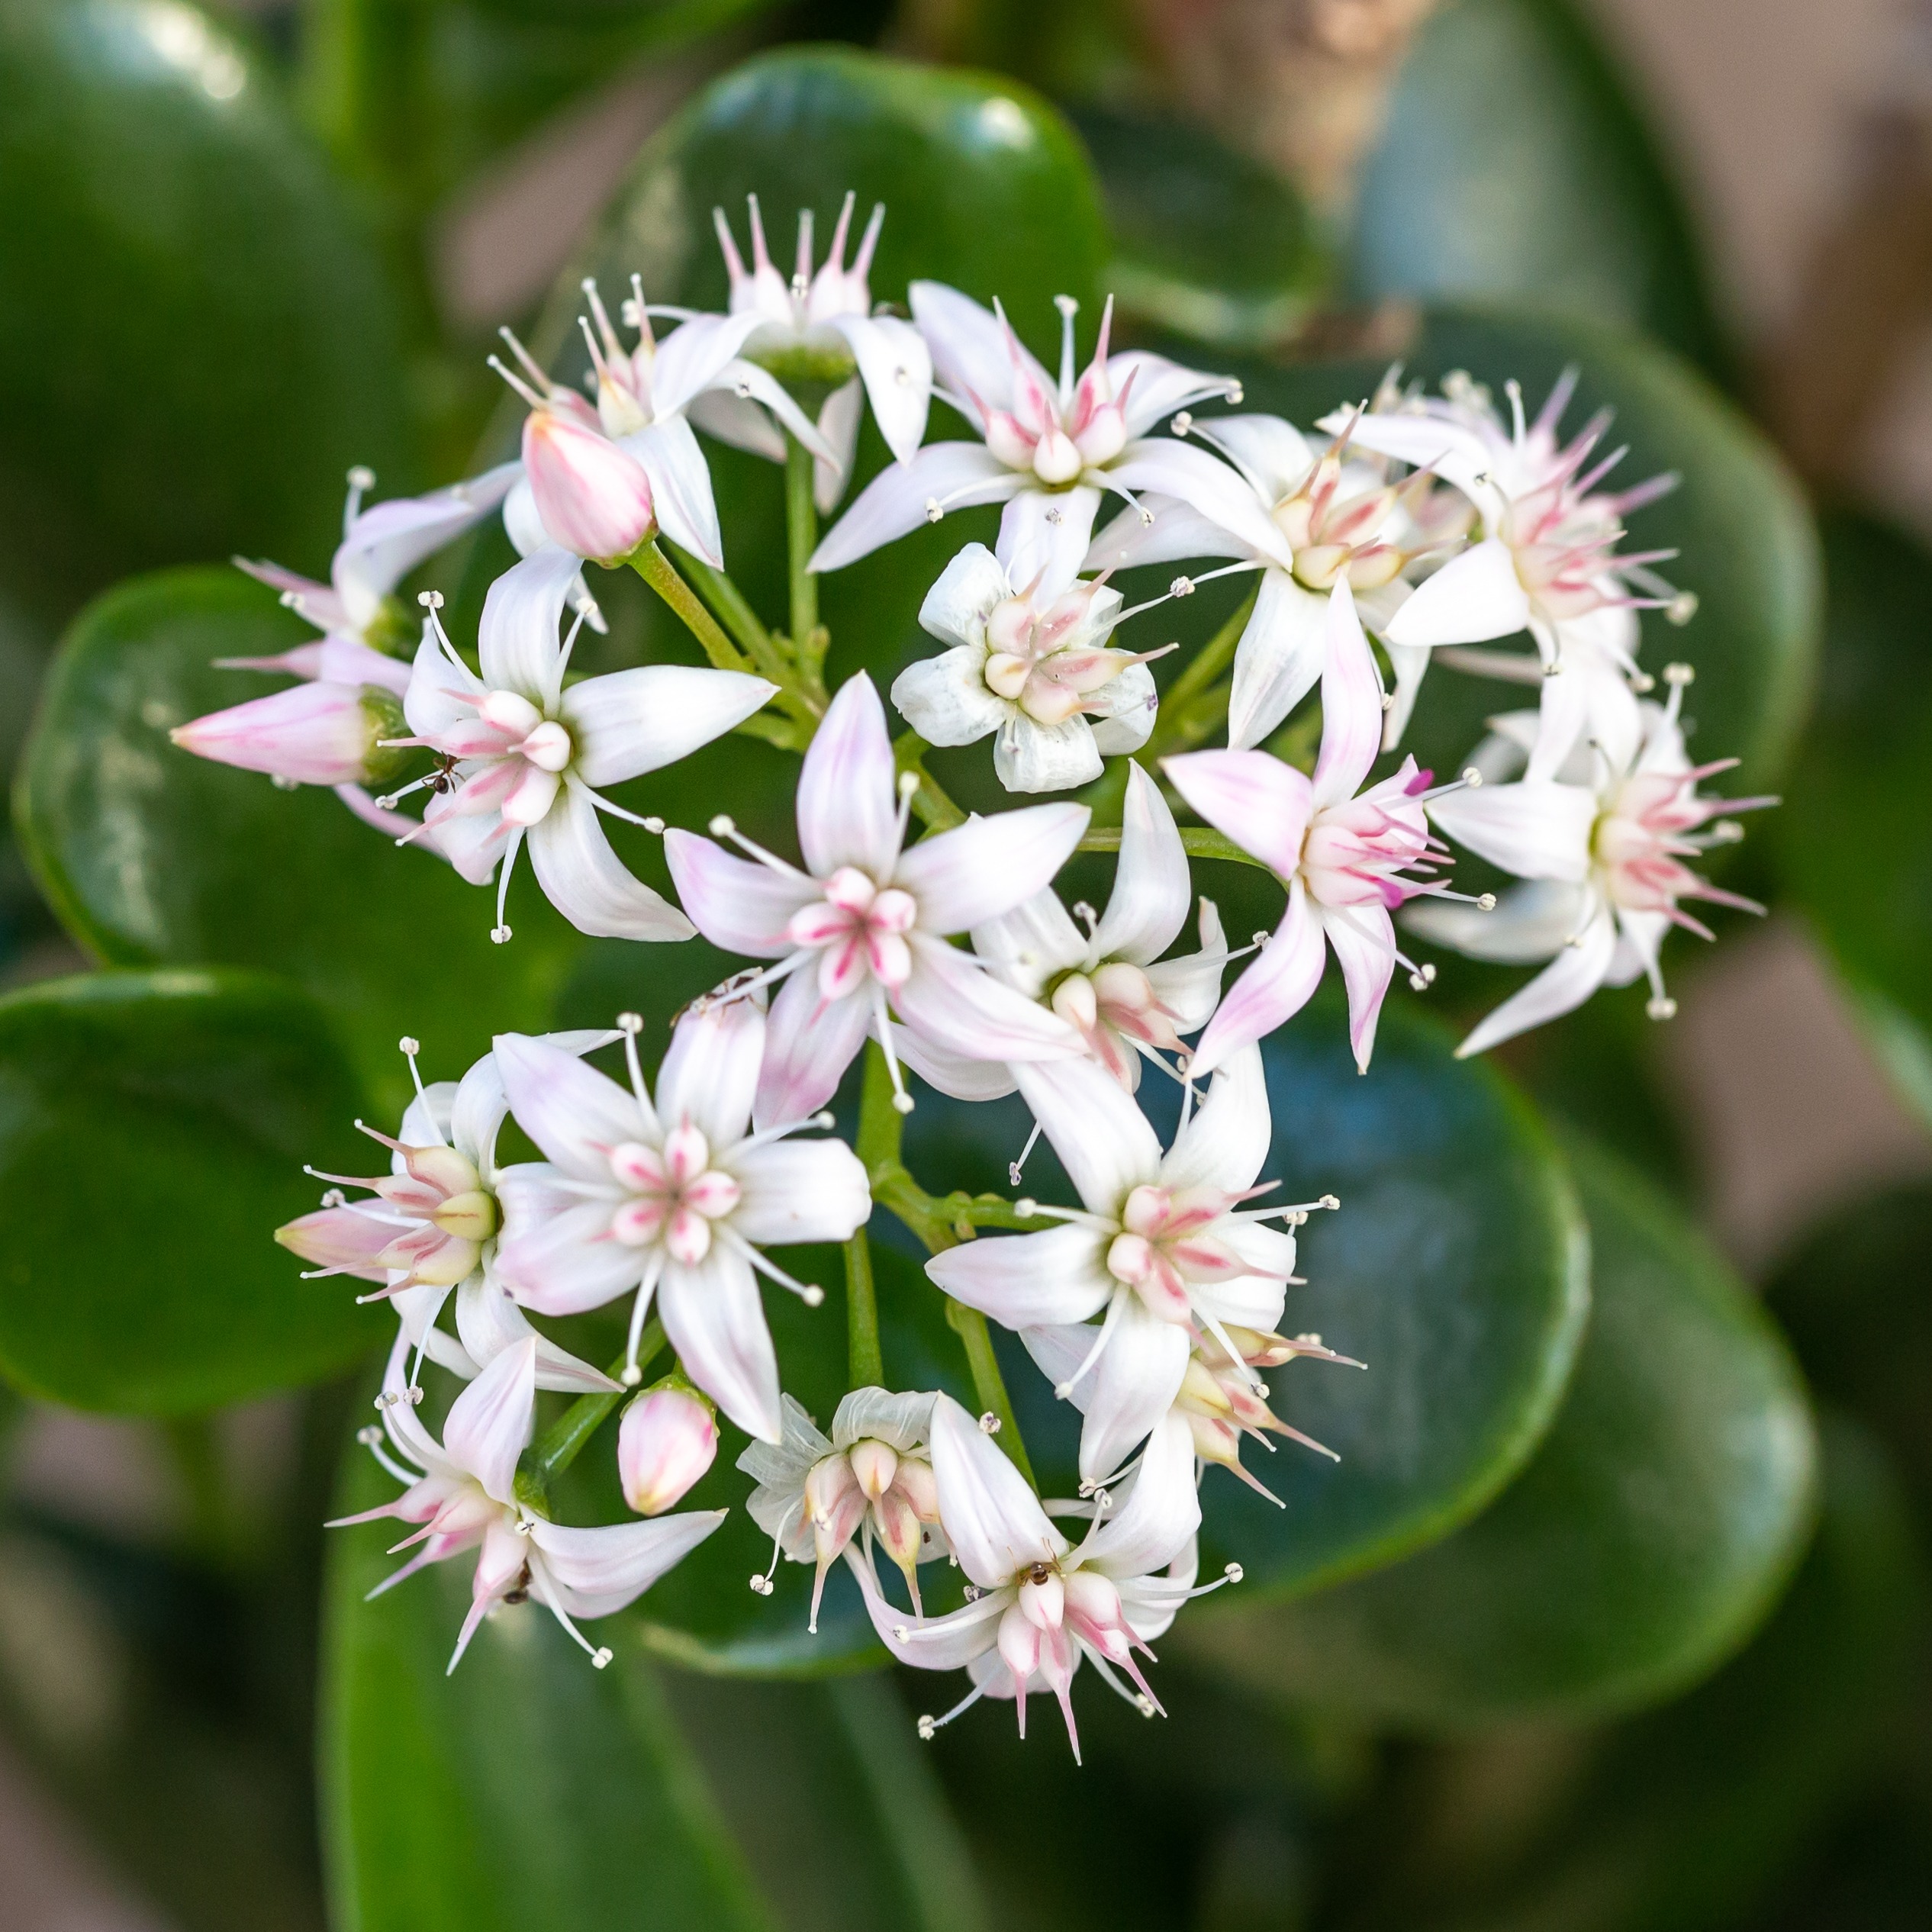 Crassula ovata is a common houseplant that rarely blooms, but here we have beautiful white and pink starlike blossoms.